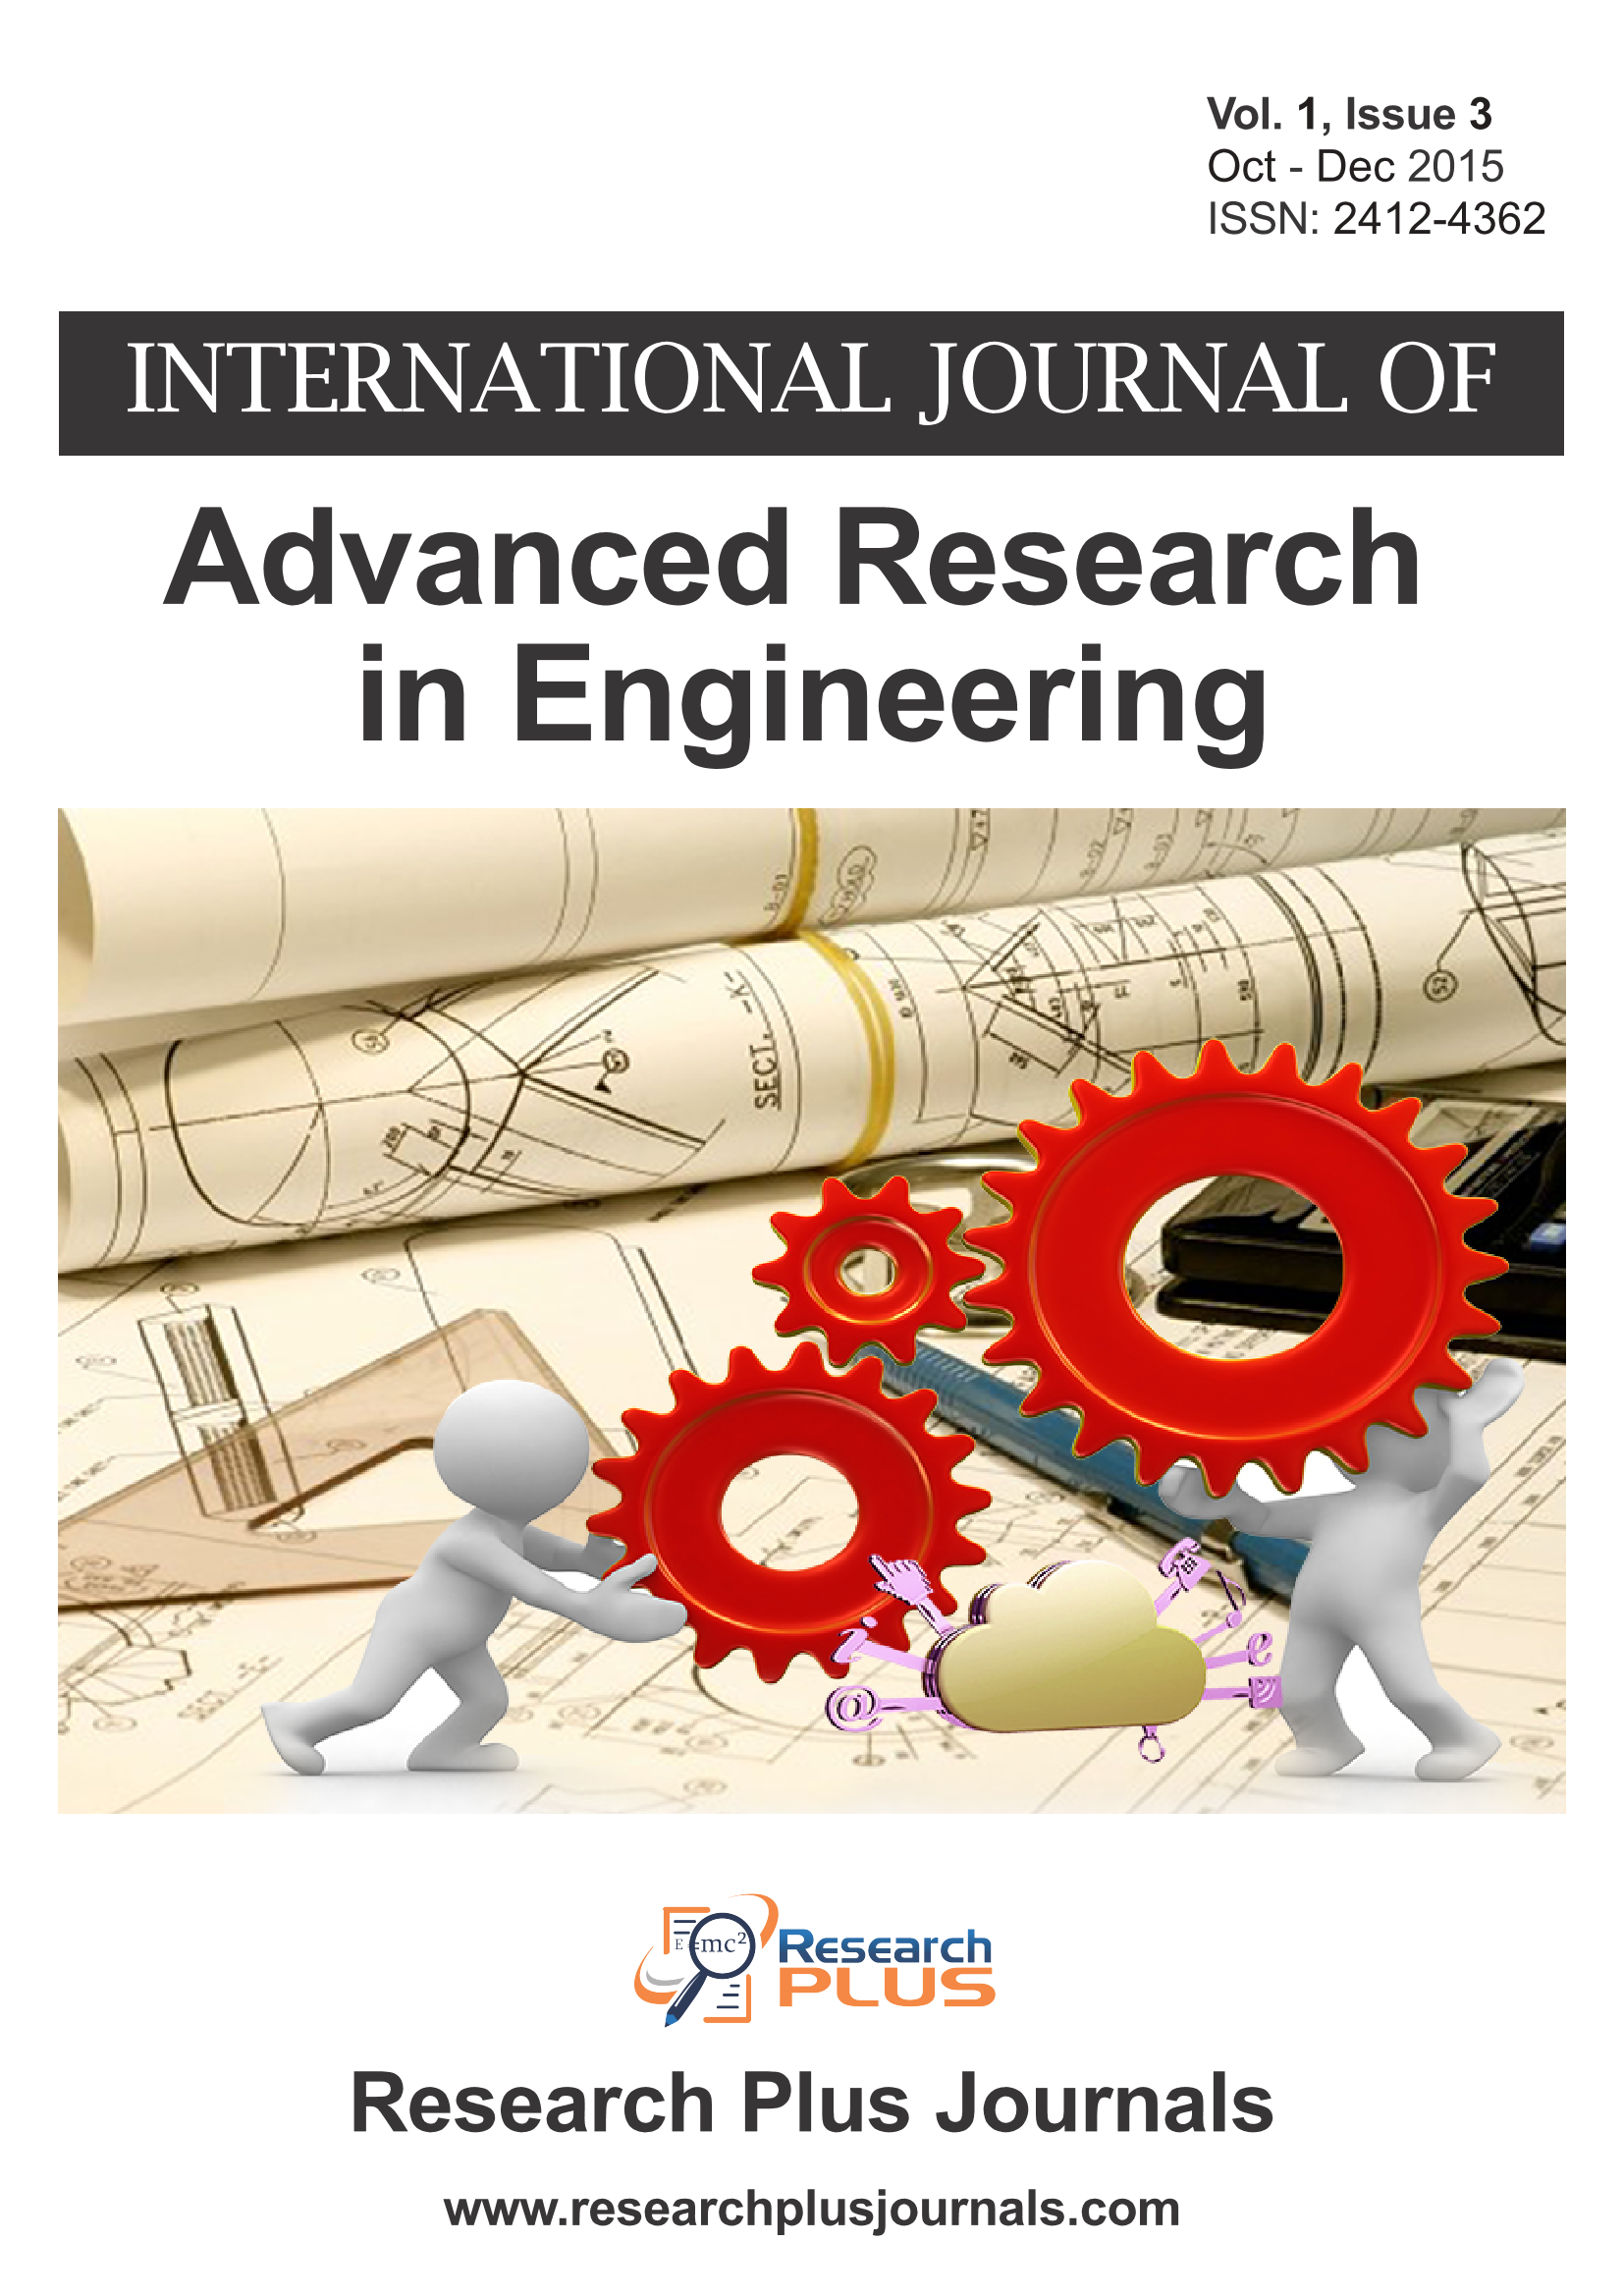 Volume 1, Issue 3, International Journal of Advanced Research in Engineering (IJARE)  (Online ISSN 2412-4362)